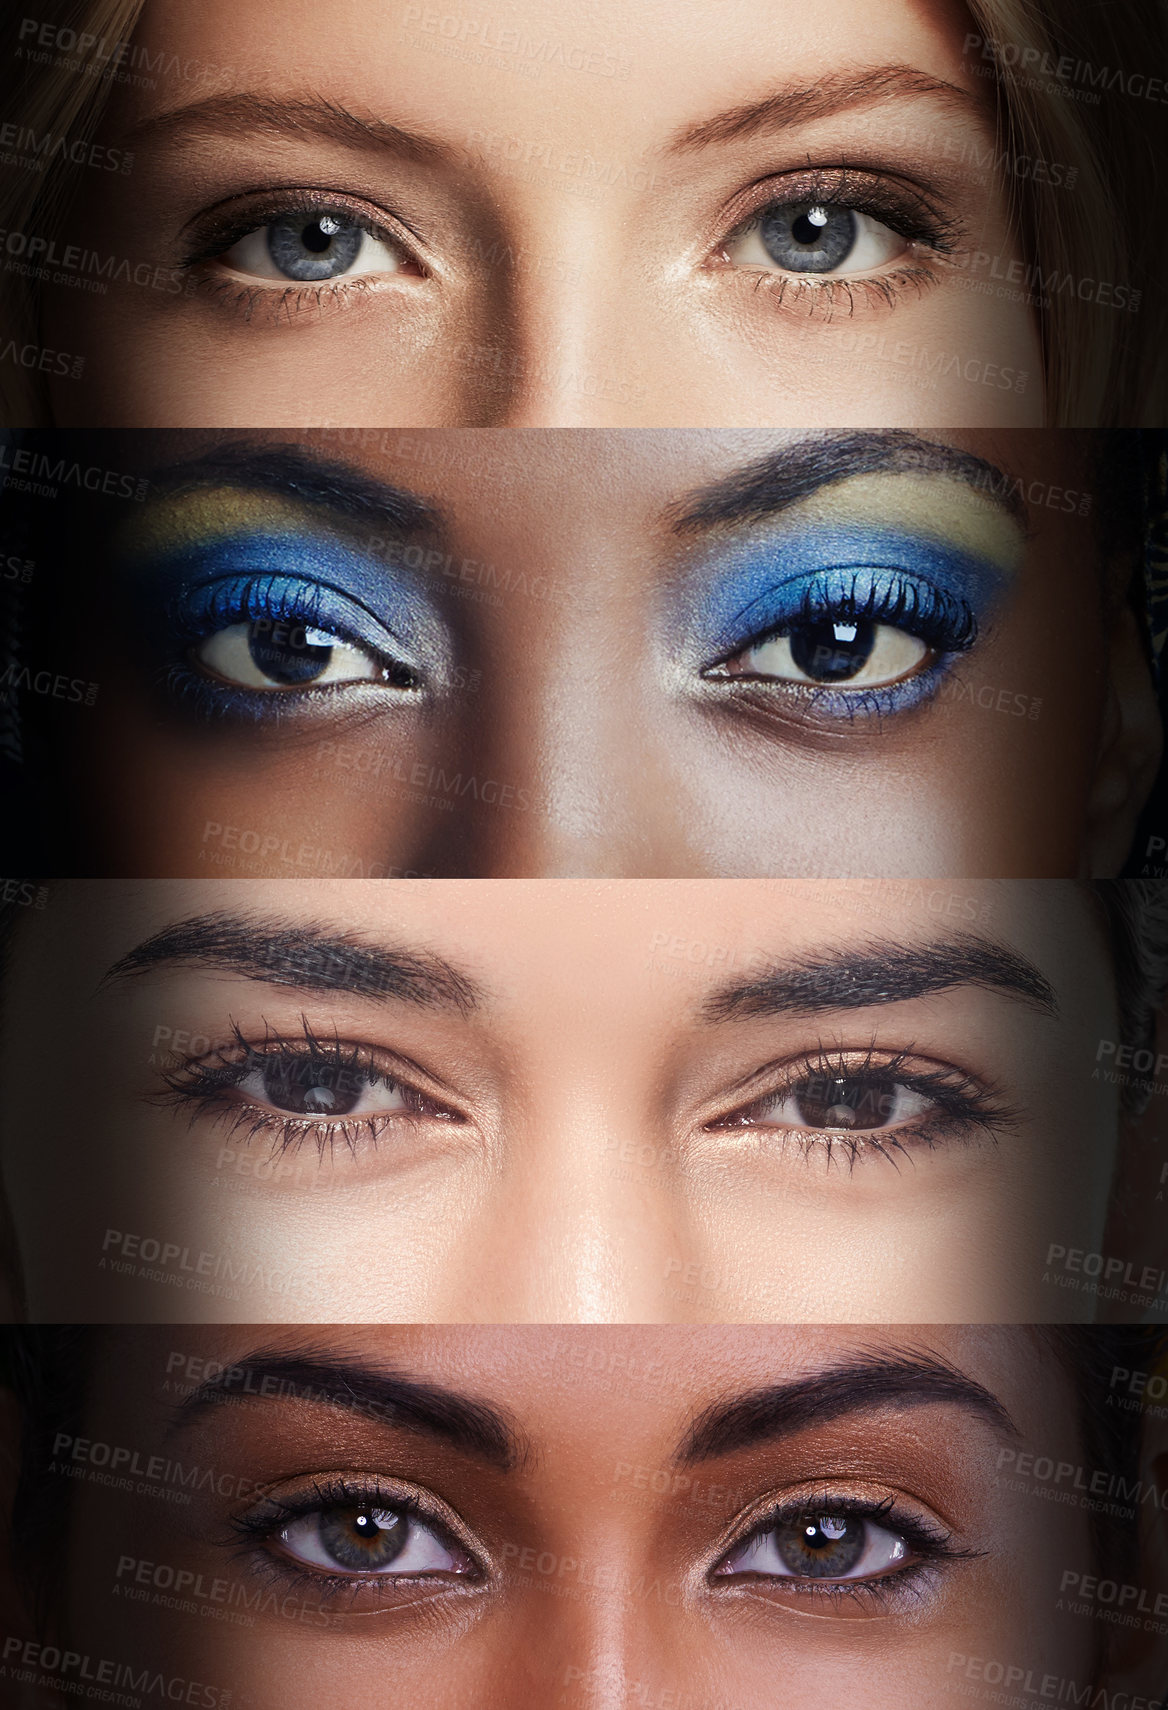 Buy stock photo Cropped view of four women's eyes from different countries